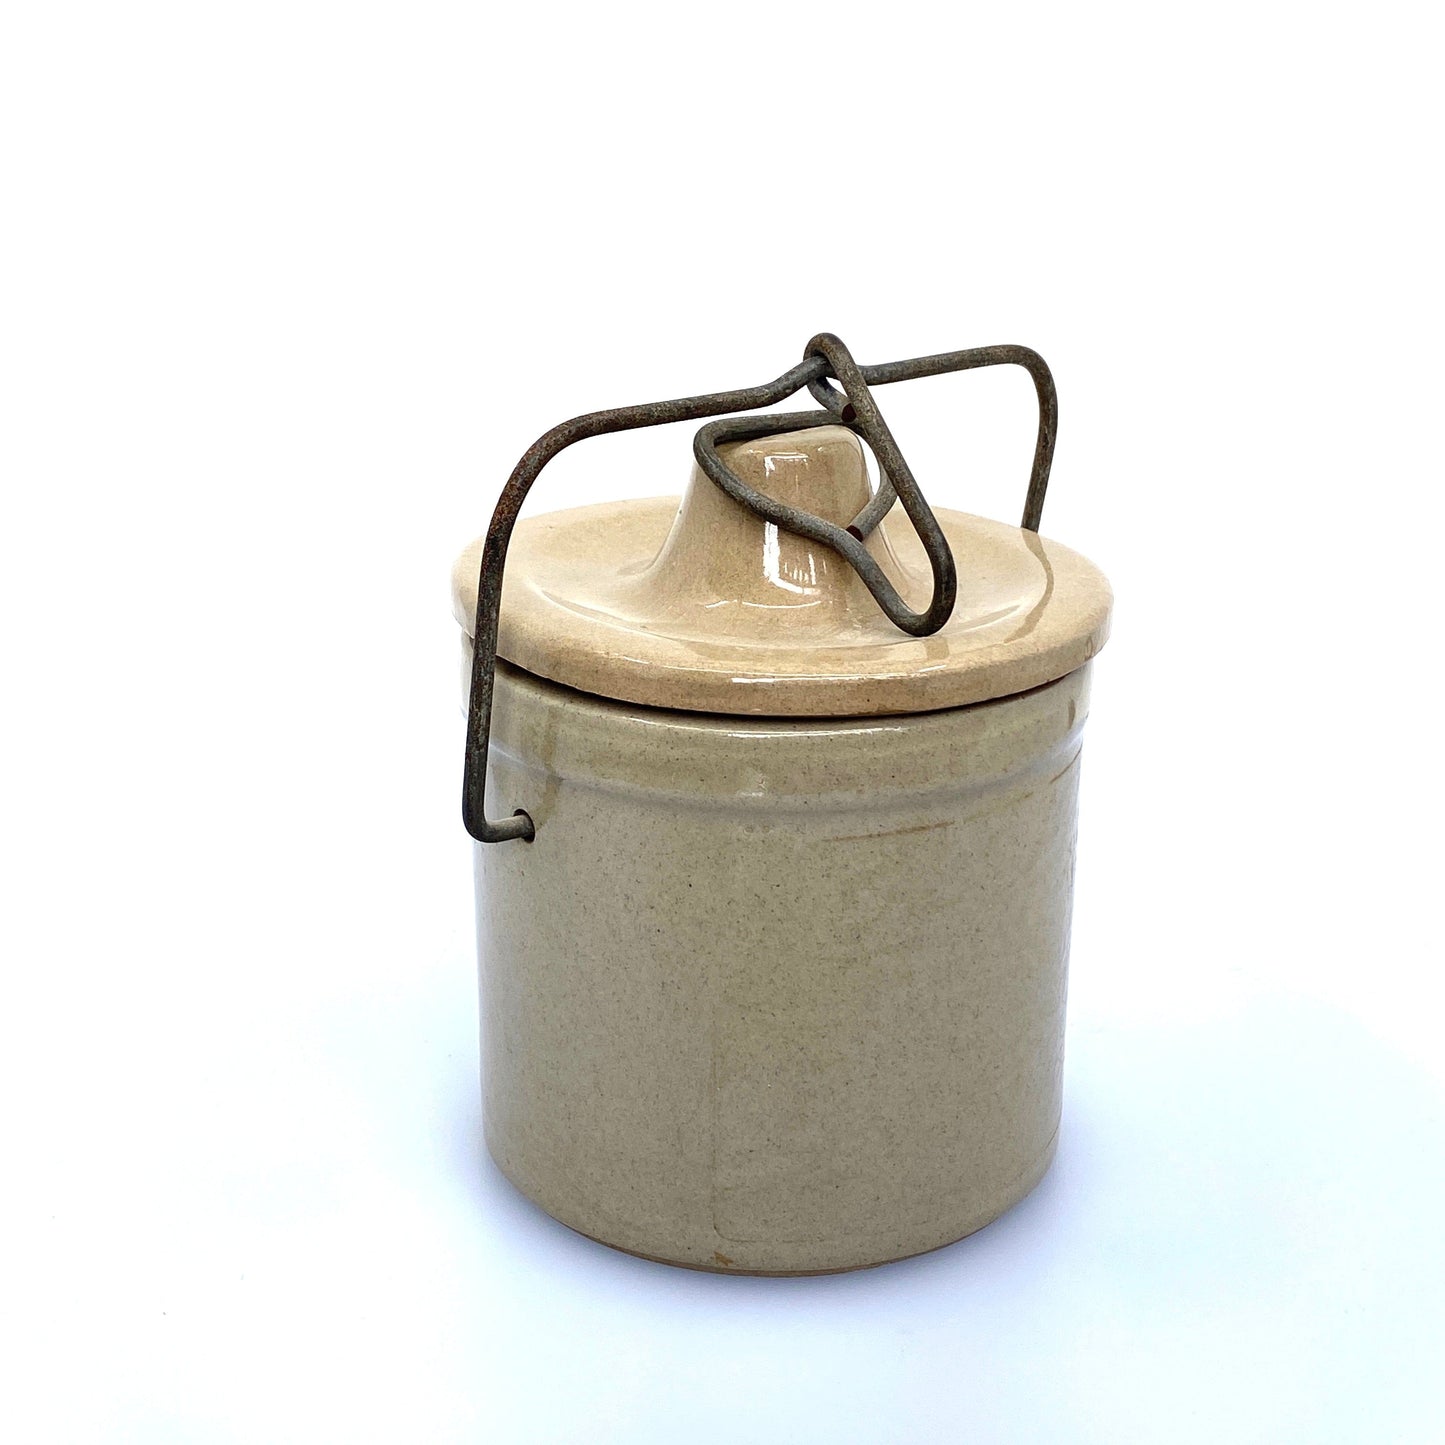 Stoneware Butter Jar Cheese Crock The Great Seal of The United States Of America